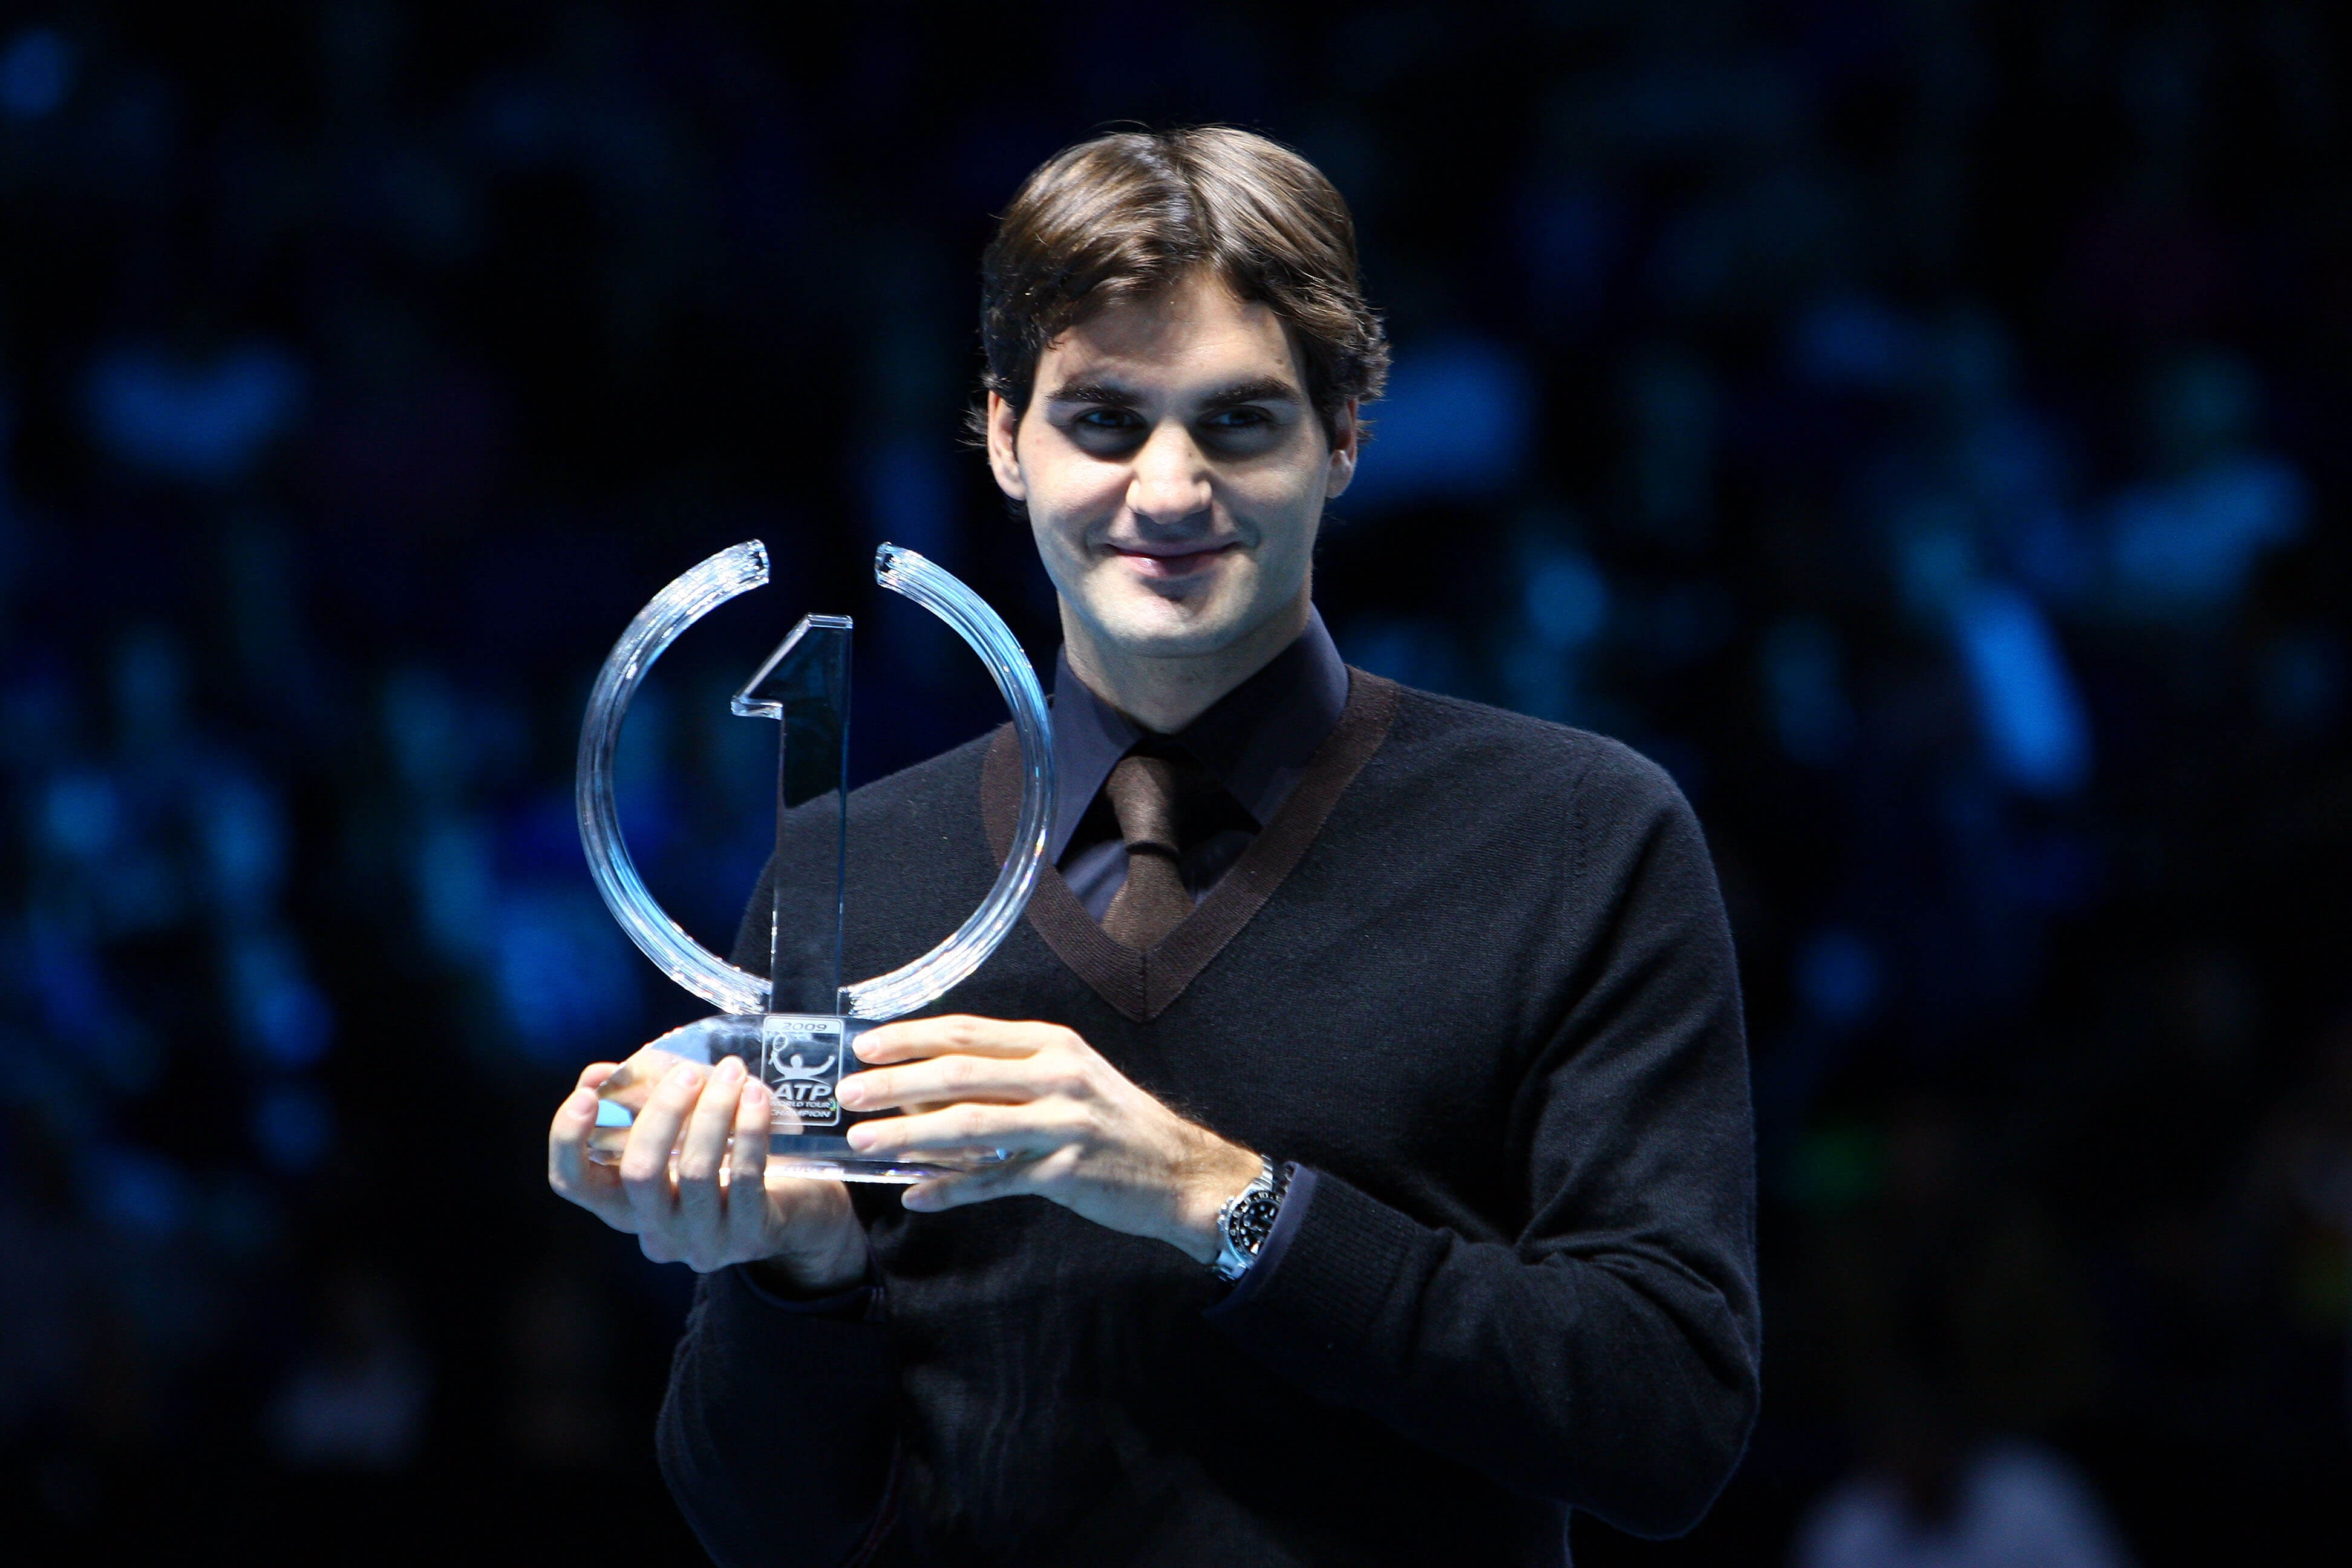 LONDON, ENGLAND - NOVEMBER 25: Roger Federer of Switzerland poses with the ATP World Tour Champion Trophy during the Barclays ATP World Tour Finals at the O2 Arena on November 25, 2009 in London, England. Federer was crowned ATP World Tour Champion for the fifth time, after becoming just the second player in the history of the ATP Rankings to regain the year-end No. 1 ranking. Federer clinched the 2009 ATP World Tour Champion title by beating Andy Murray at the Barclays ATP World Tour Finals on November 24. (Photo by Julian Finney/Getty Images)